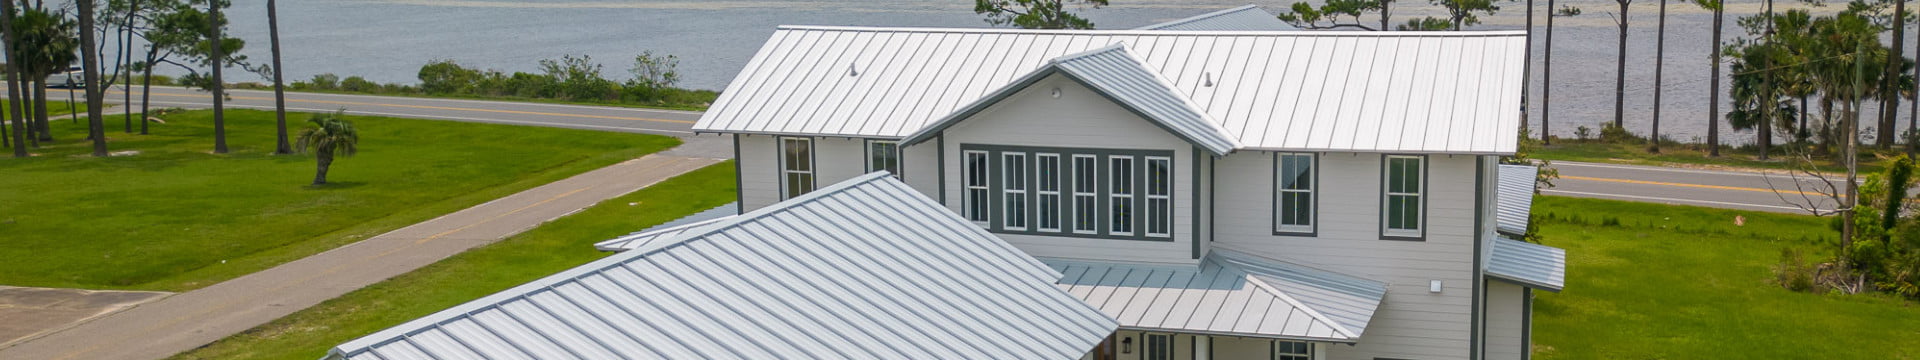 Metal Roofing by Hall Roofing Company